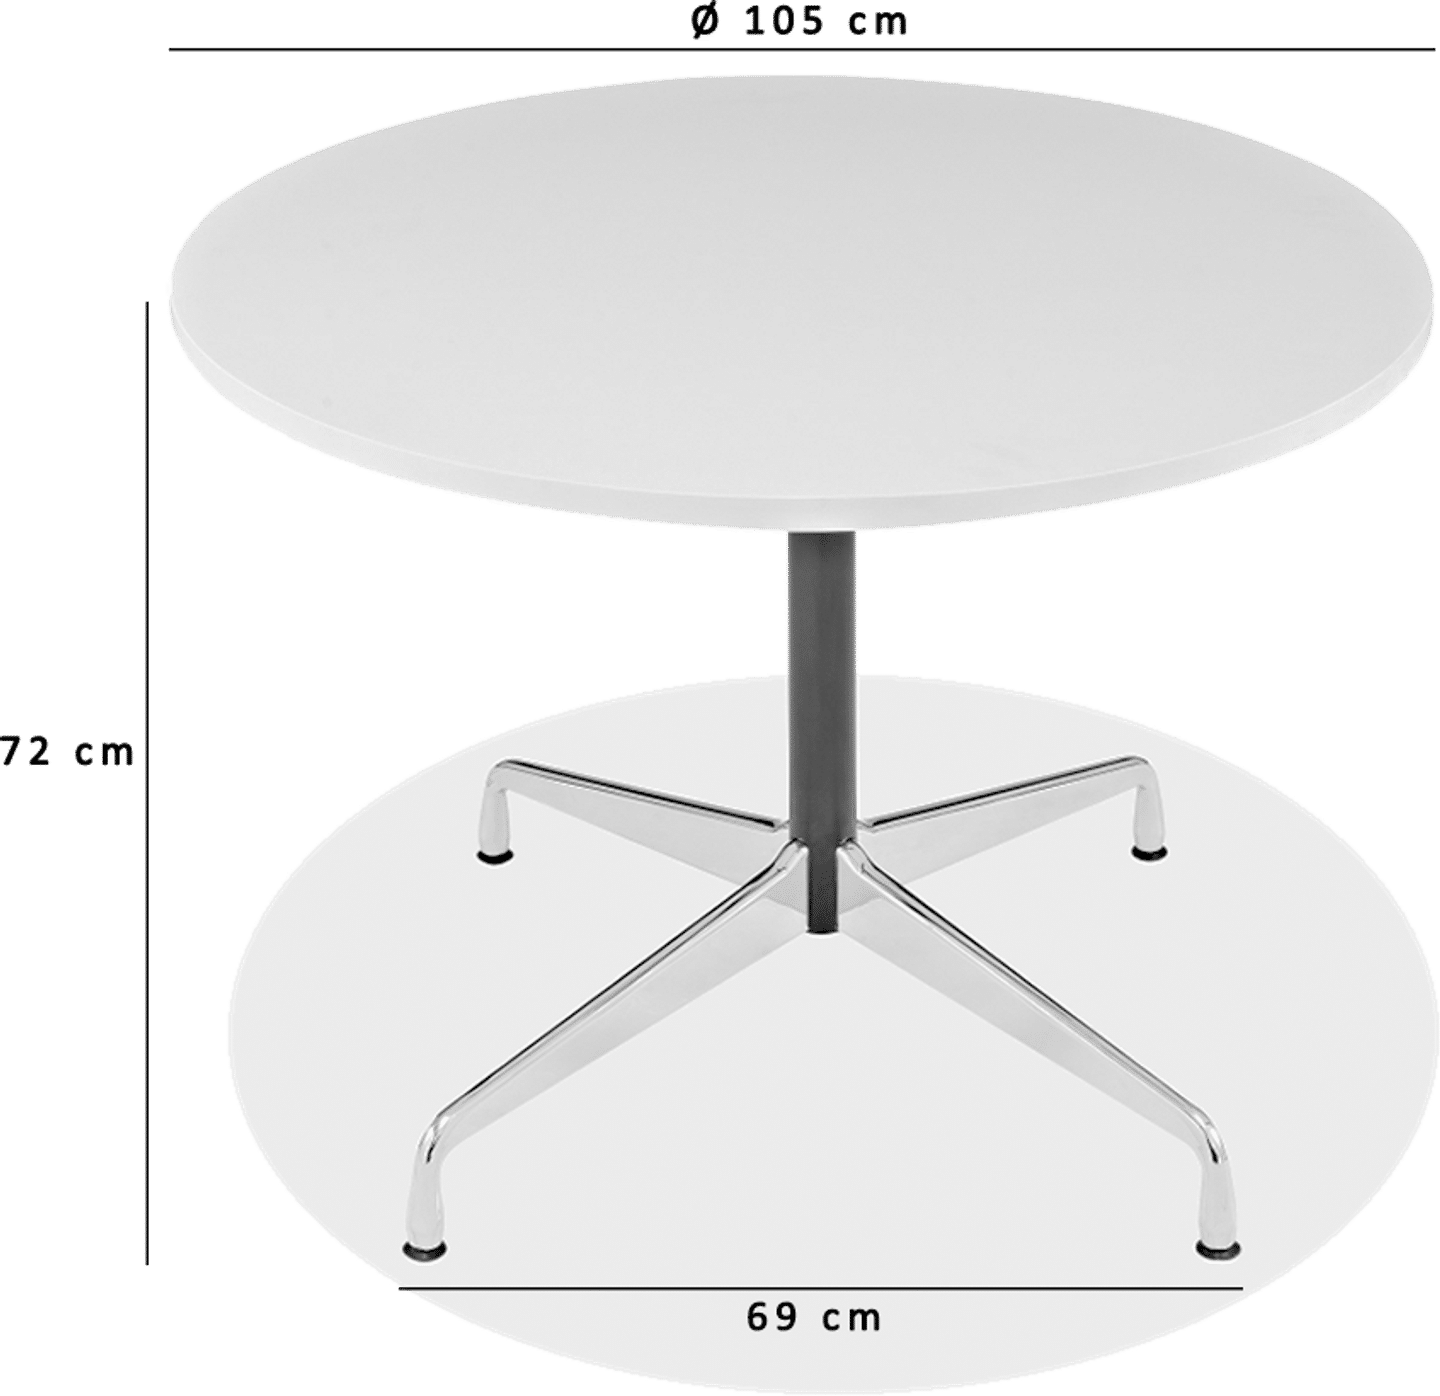 Eames Style Round Conference Table Black/105 CM image.